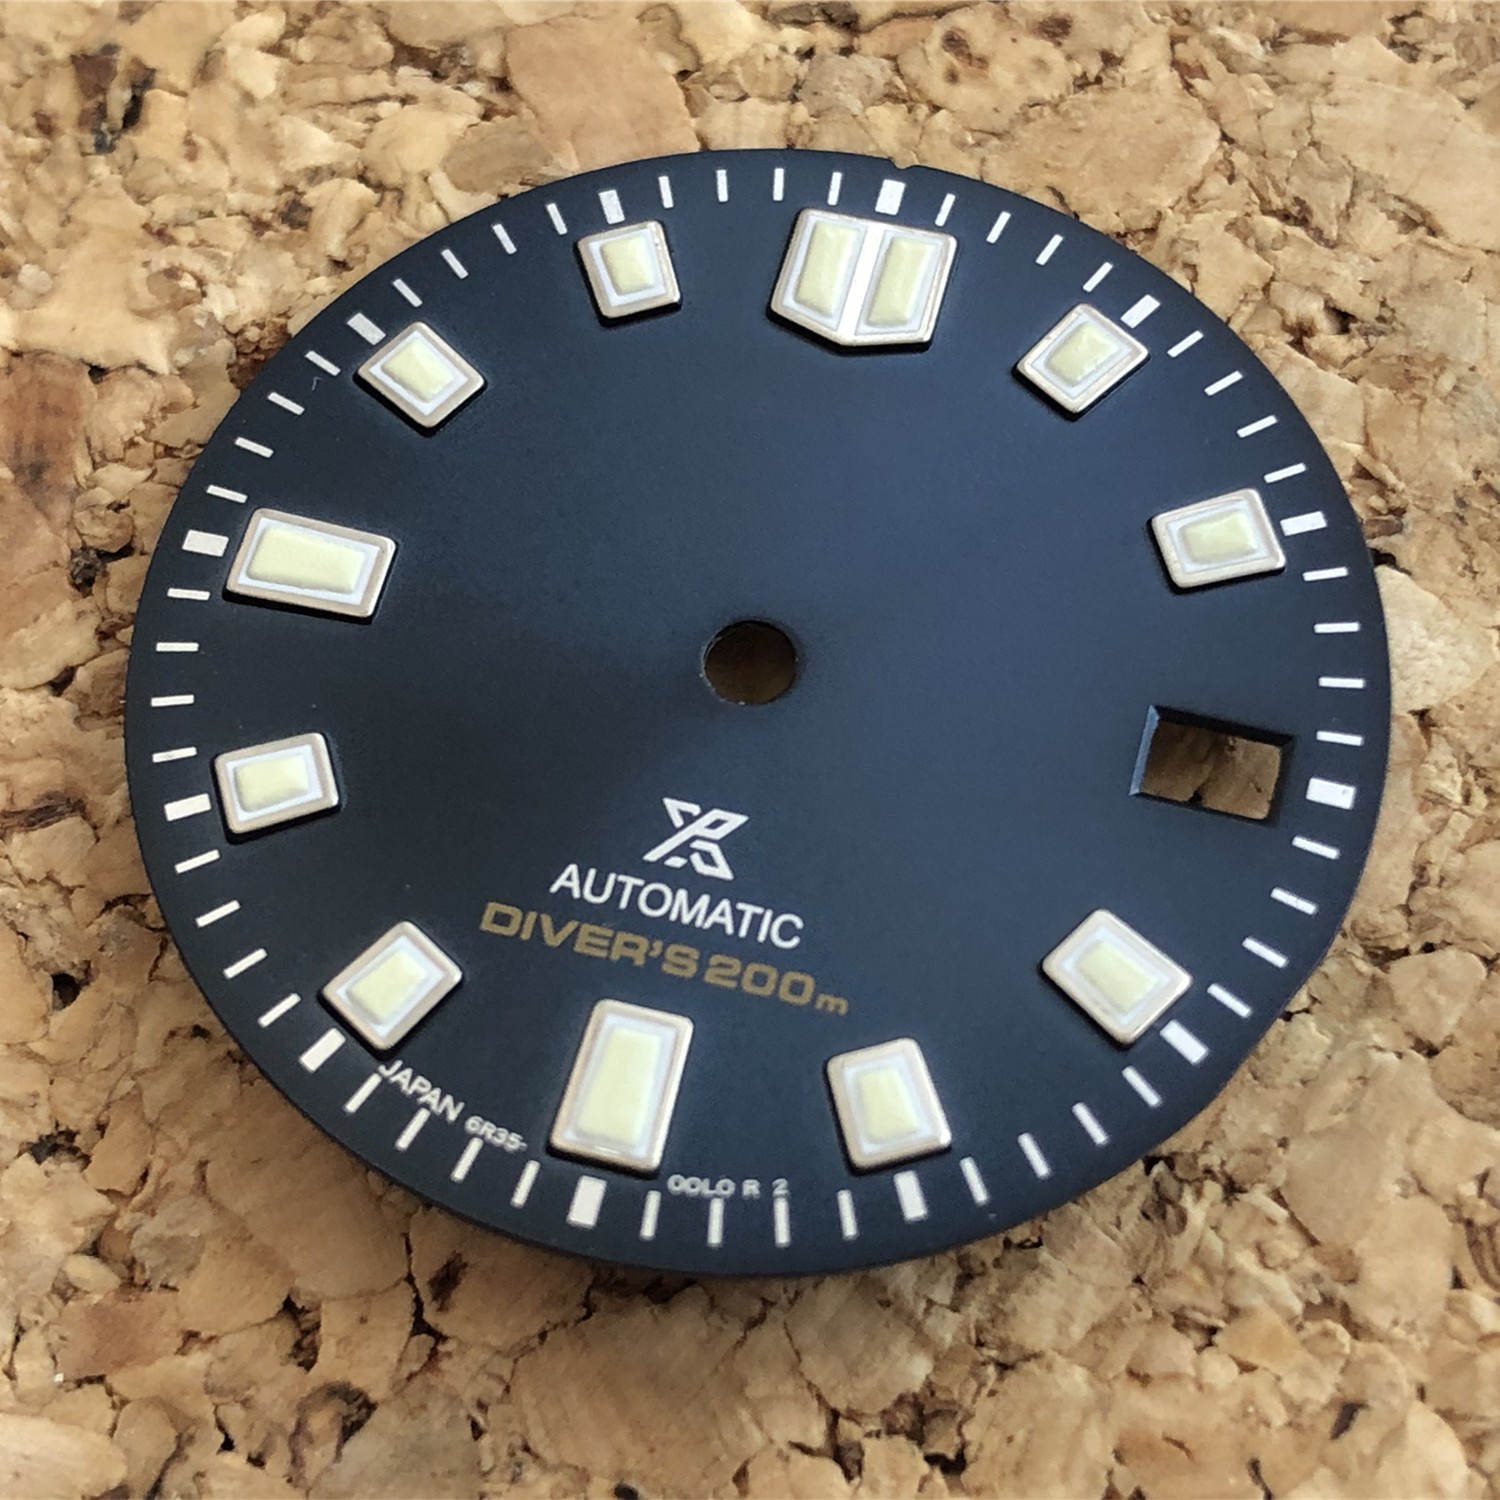 S-watch dial with s logo for sei..Oemdial blue color 28.5mm super c3 plume fit skx007/009 Japan 6r35